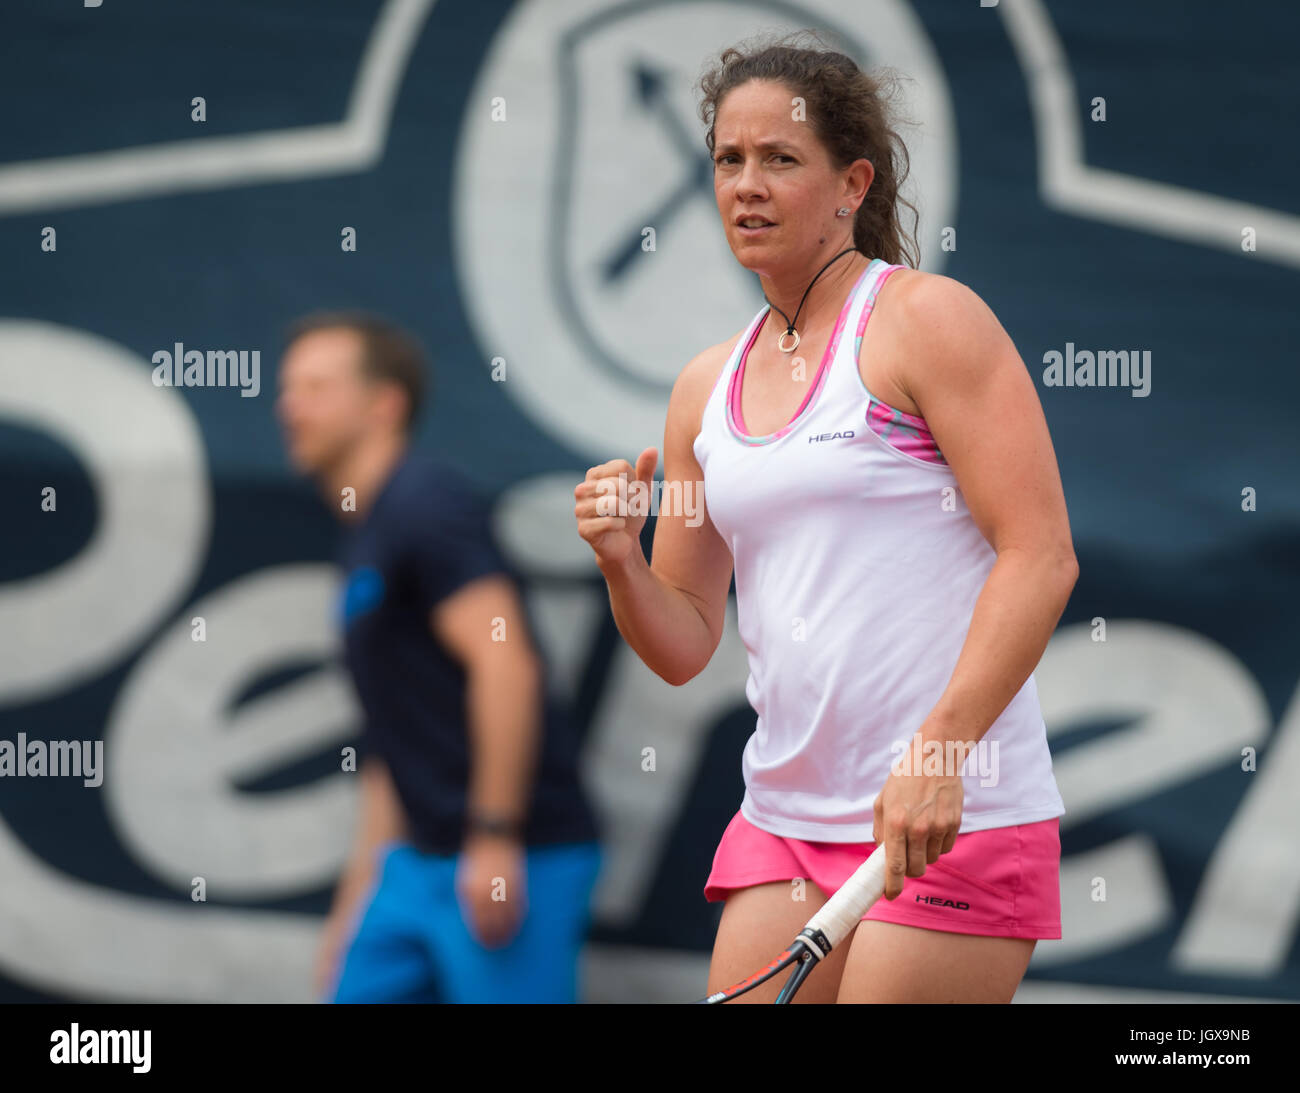 Versmold, Germany. 11 July, 2017. Patty Schnyder at the 2017 Reinert Open  ITF $60 tennis tournament © Jimmie48 Photography/Alamy Live News Stock  Photo - Alamy